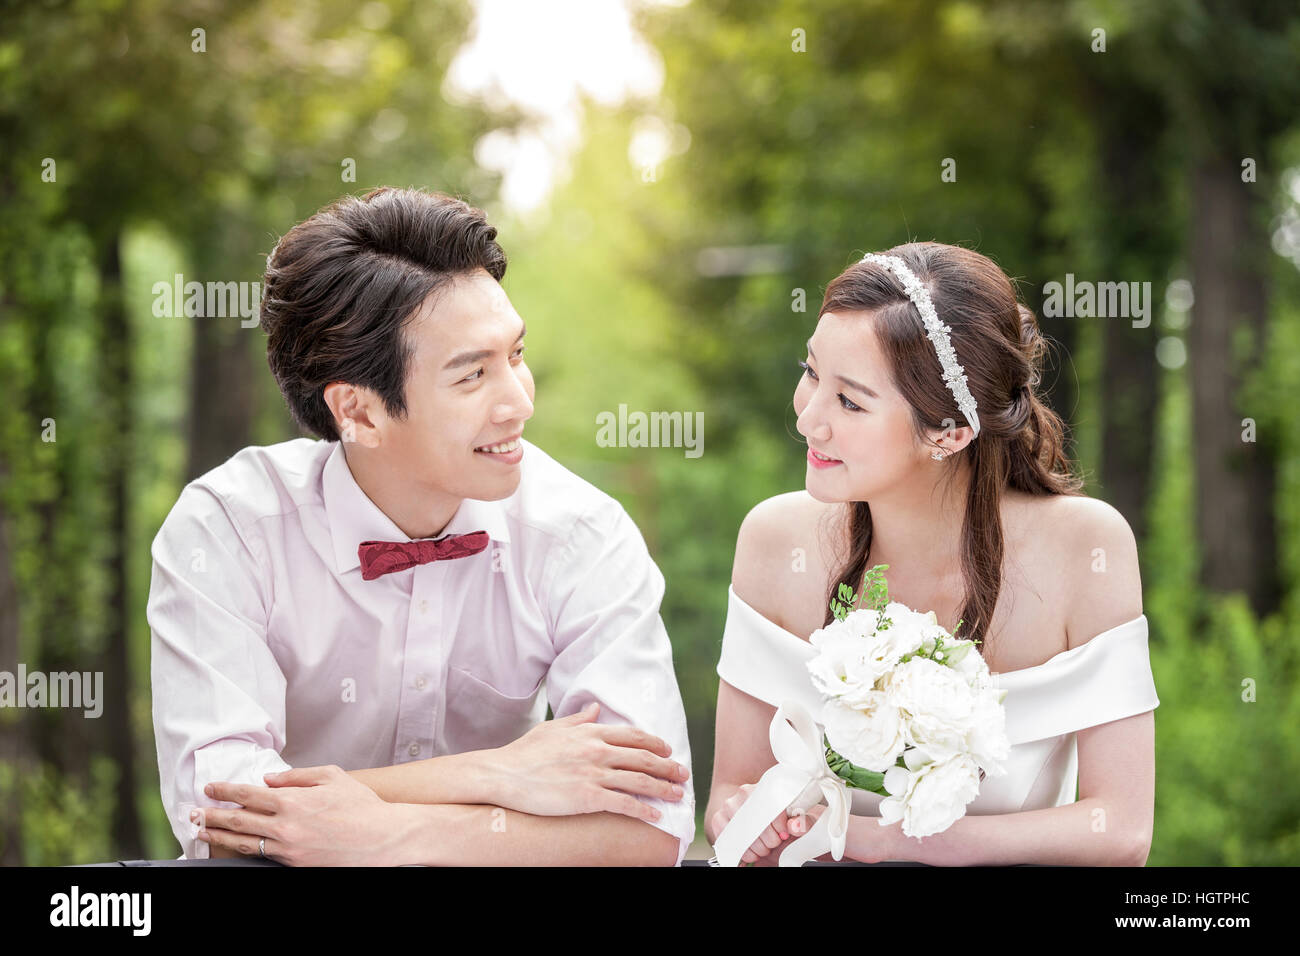 Portrait of young romantic wedding couple face to face outdoors ...